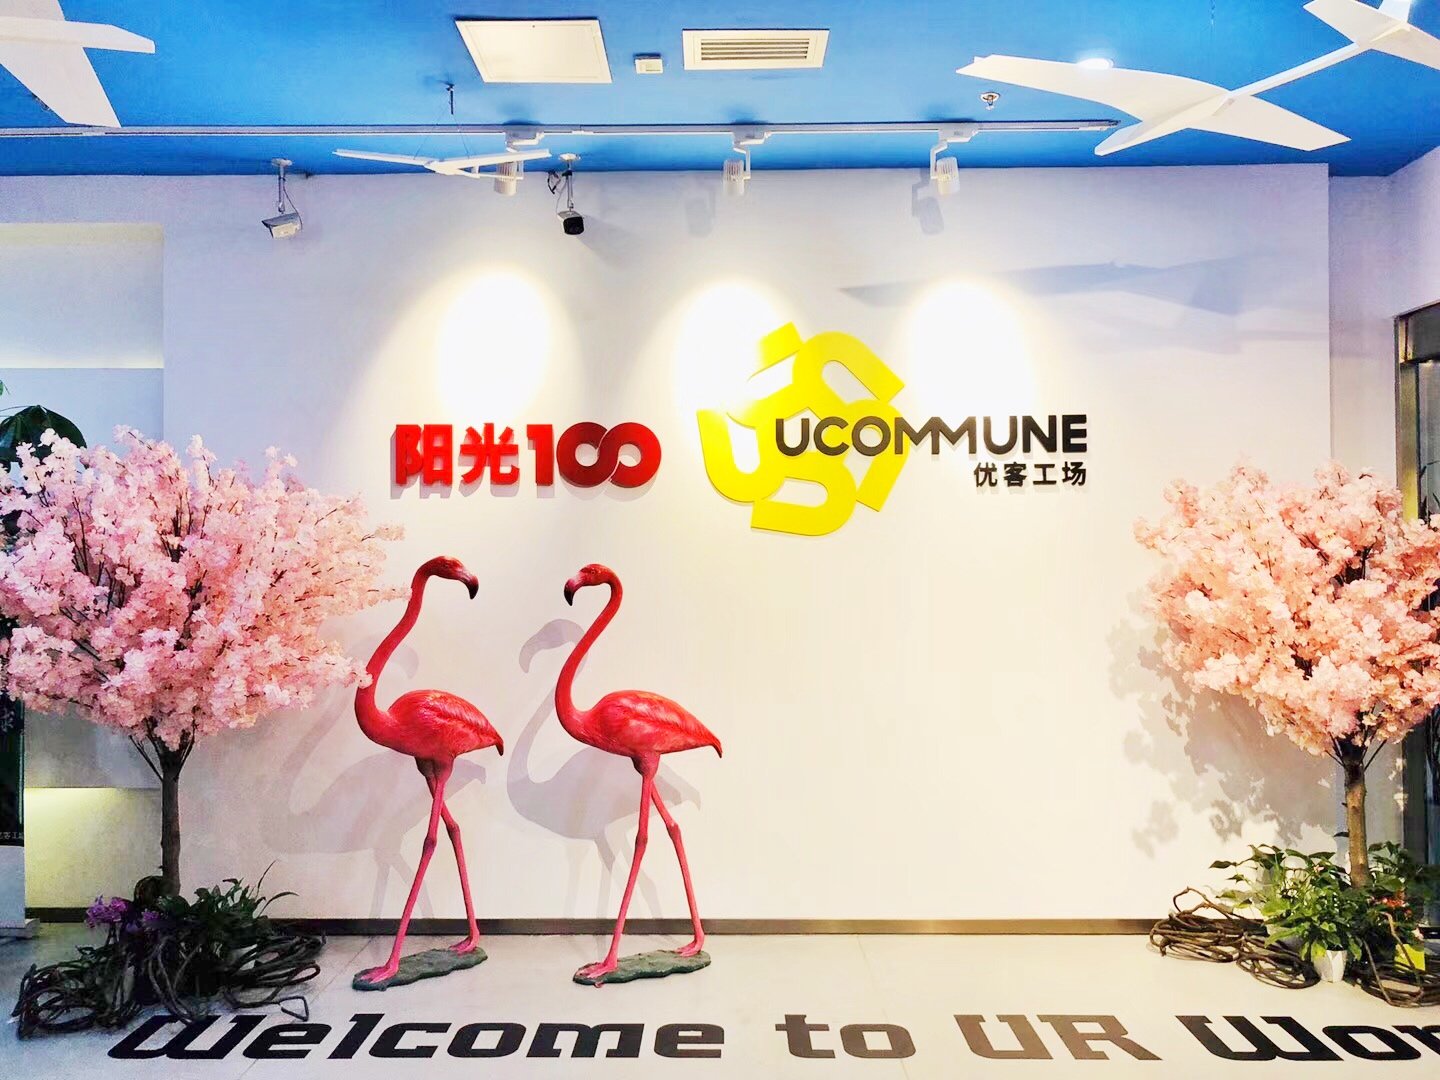 Chinese WeWork rival Ucommune files for US IPO, sources say